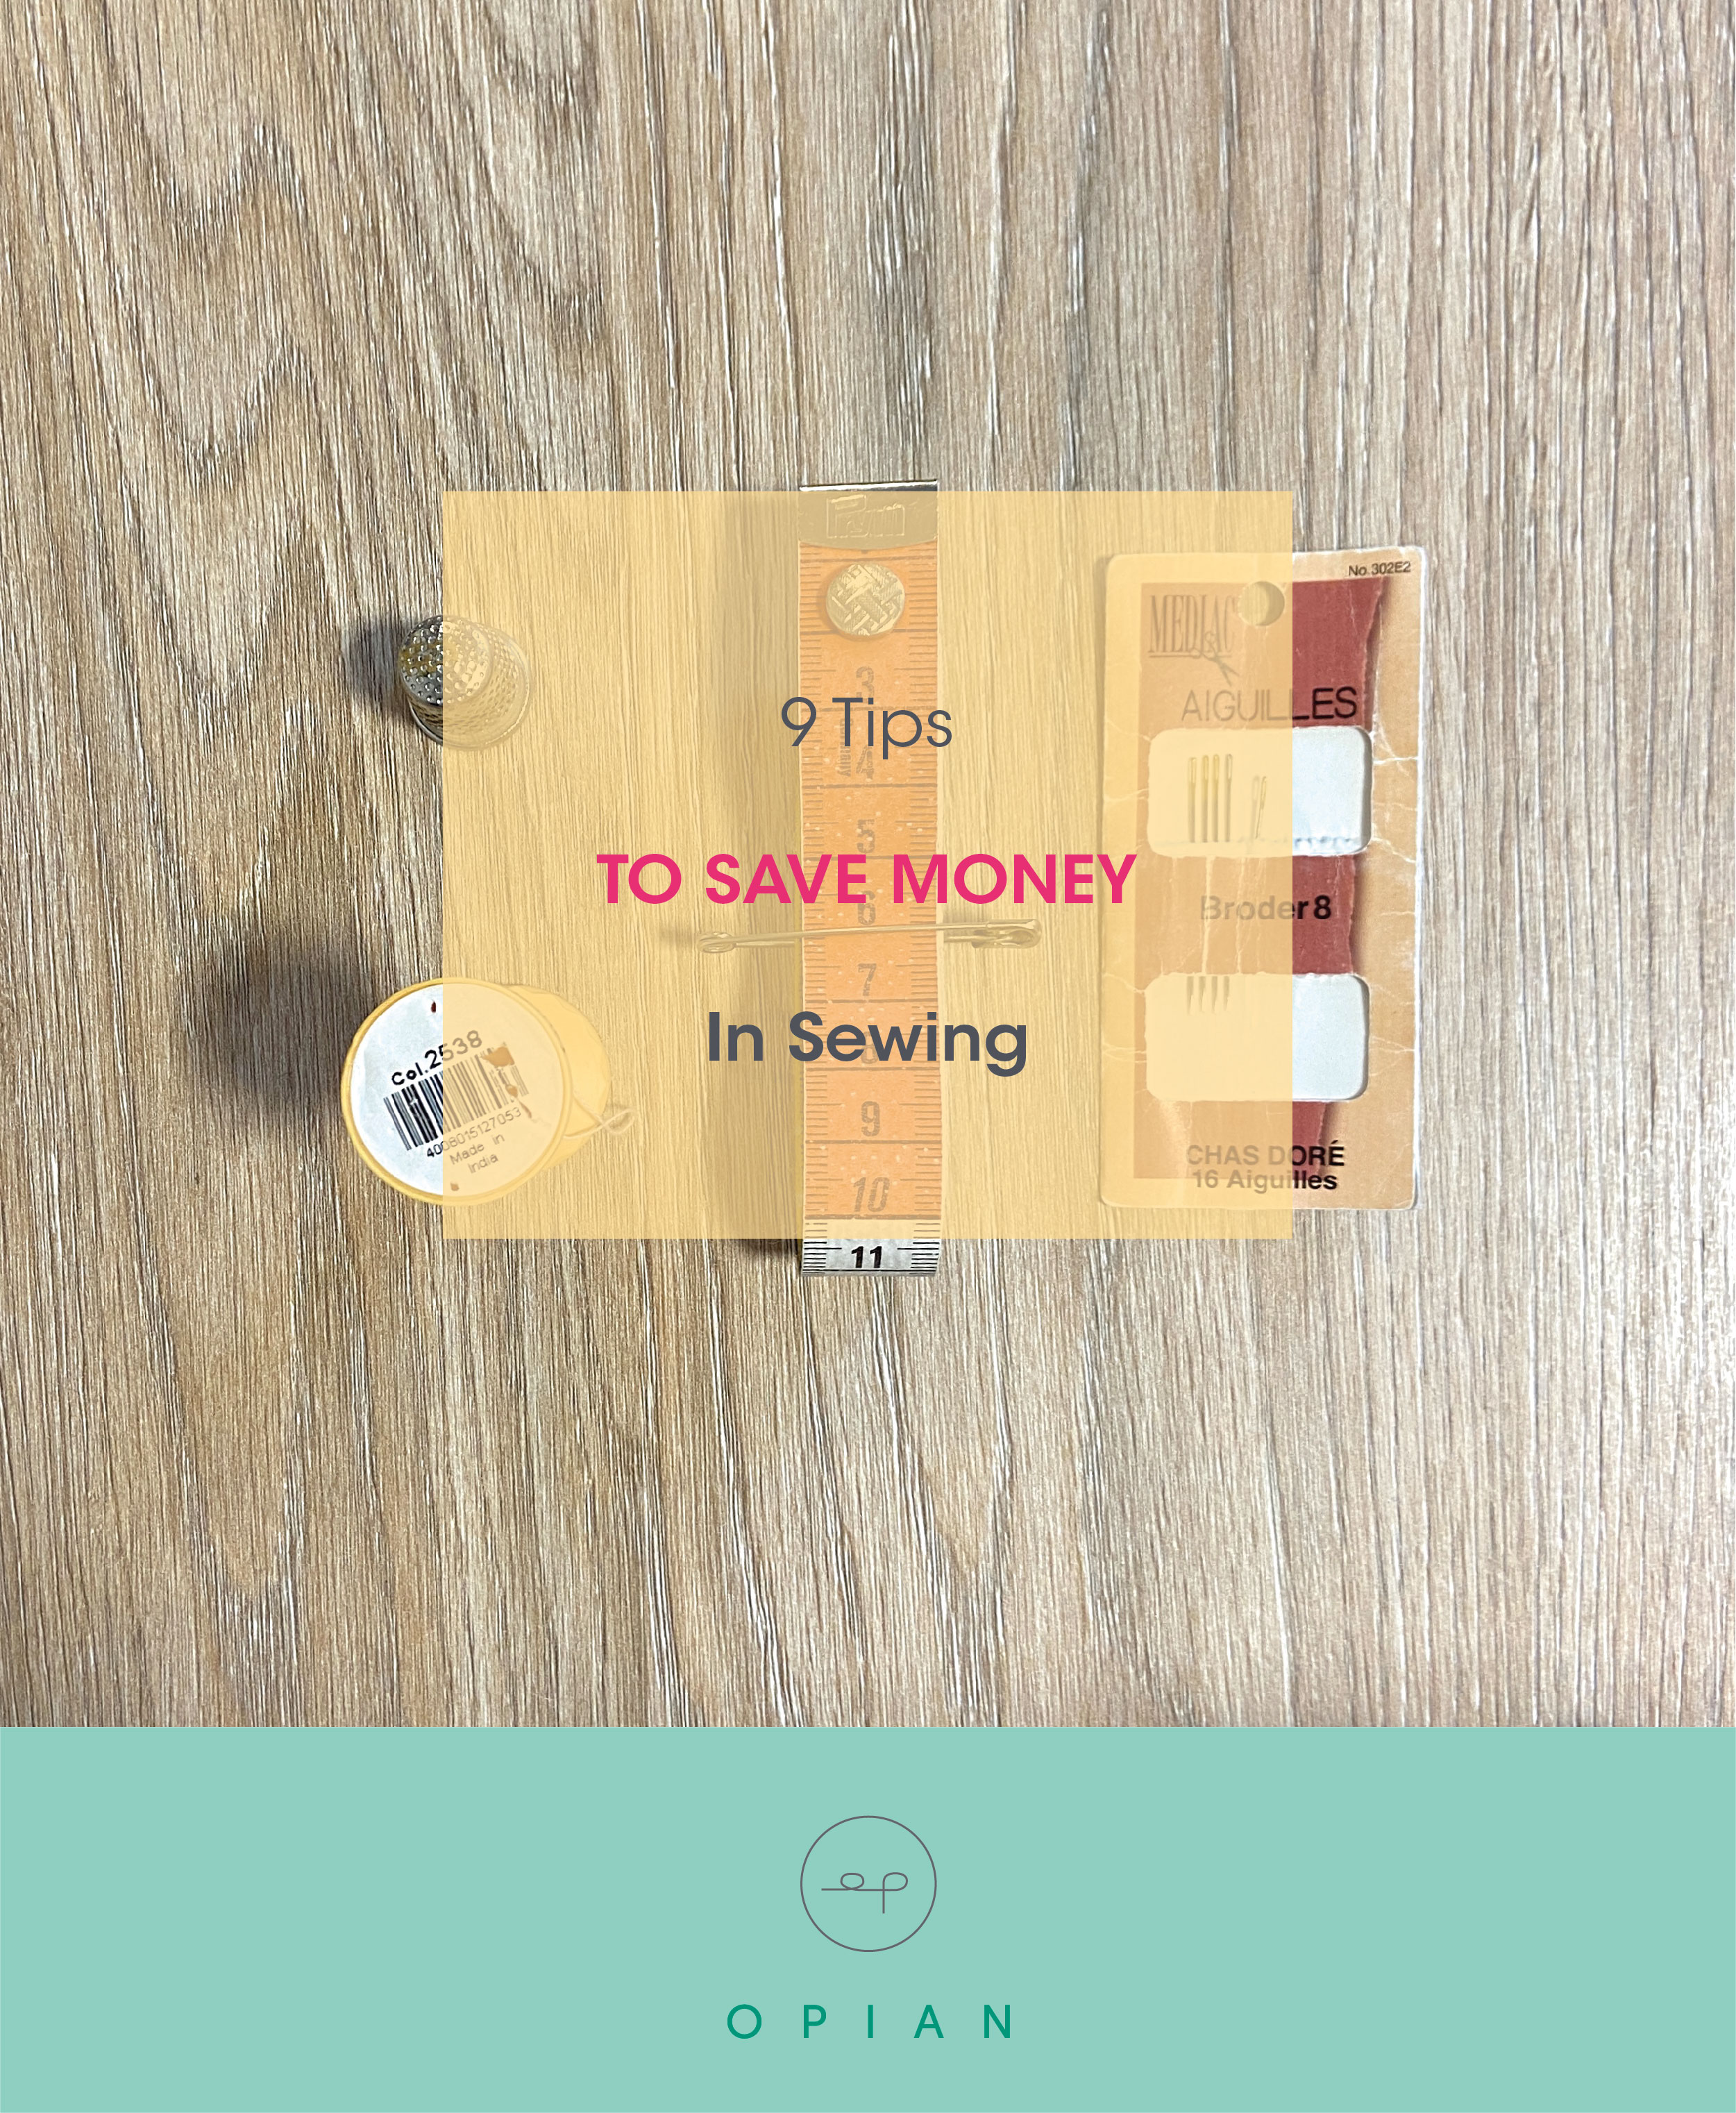 9 tips tu reduce your expenses in sewing